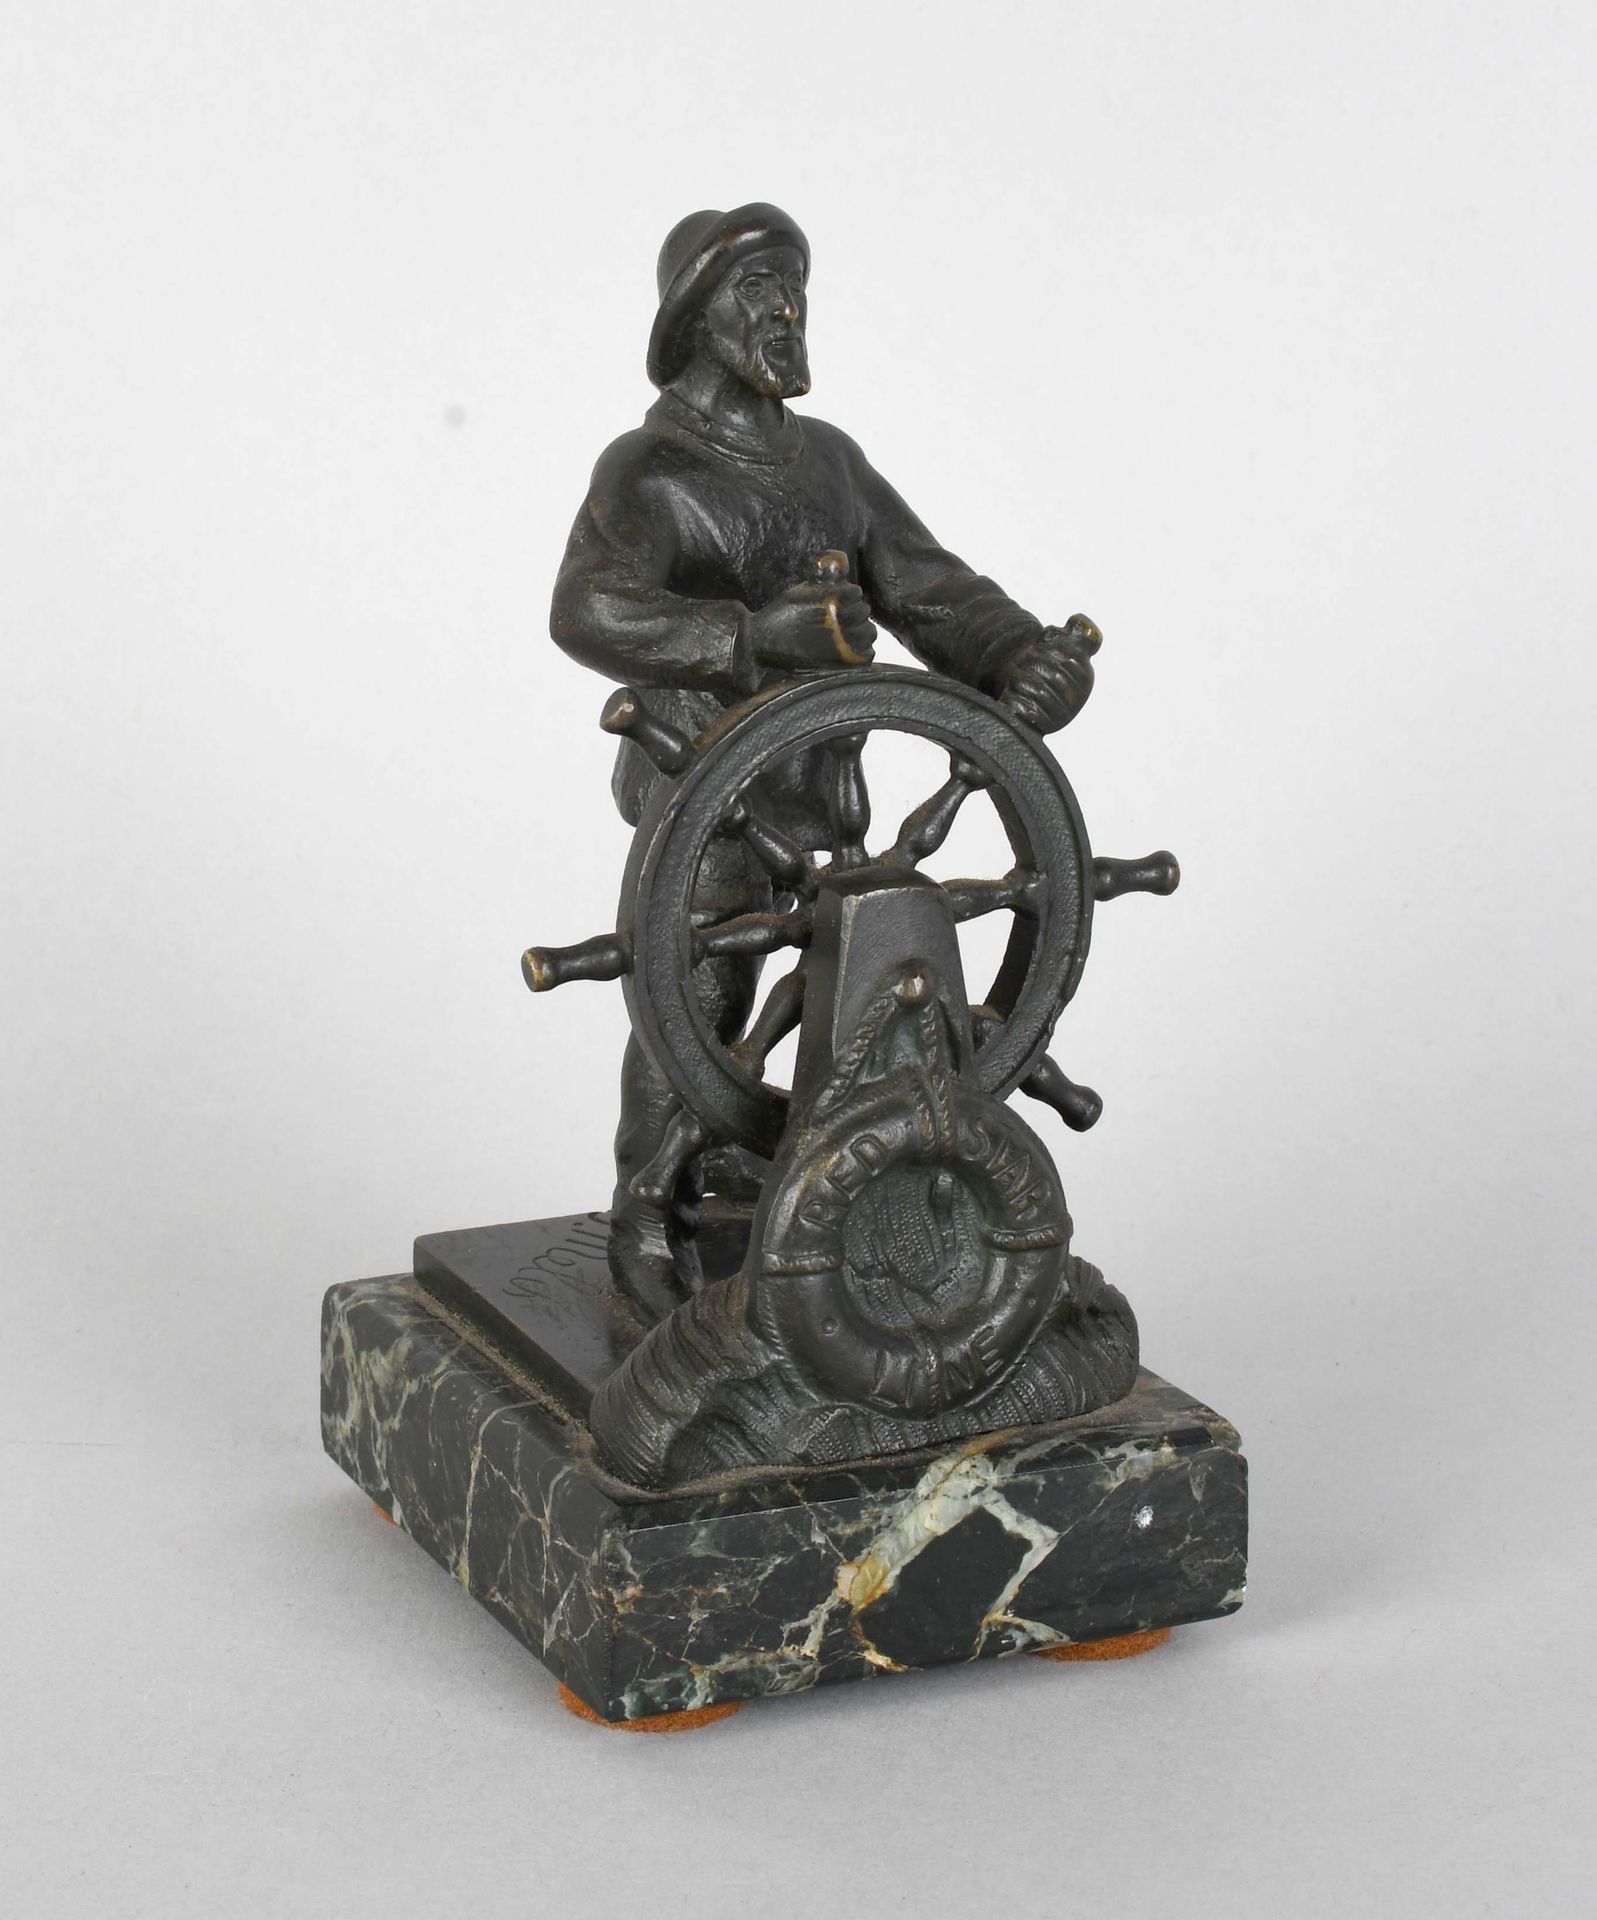 Null Edward Melis (Red Star Line)

Small bronze sculpture : "Sailor at the helm"&hellip;